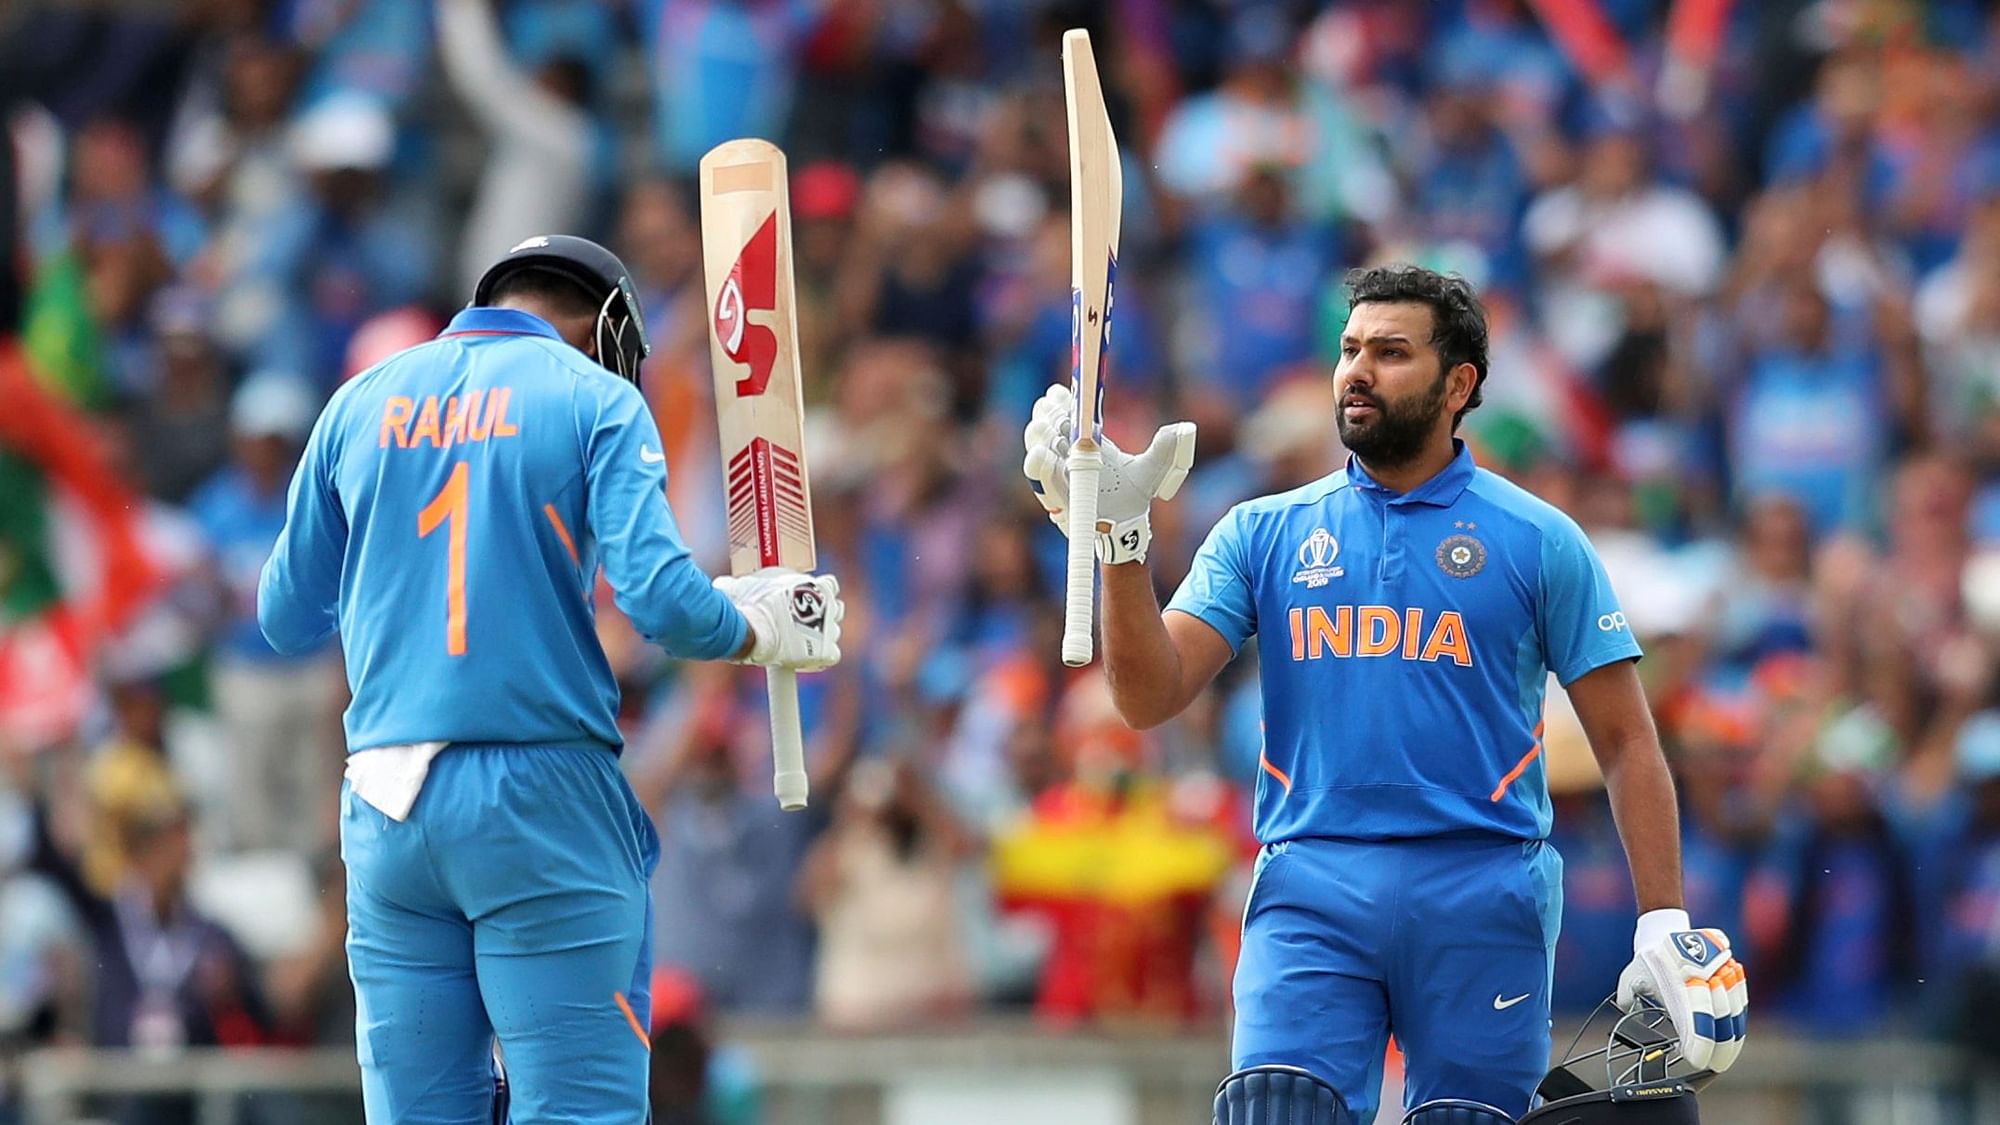 India’s KL Rahul raises his bat and bows to teammate Rohit Sharma, right, as the latter celebrates scoring a century during the Cricket World Cup match.